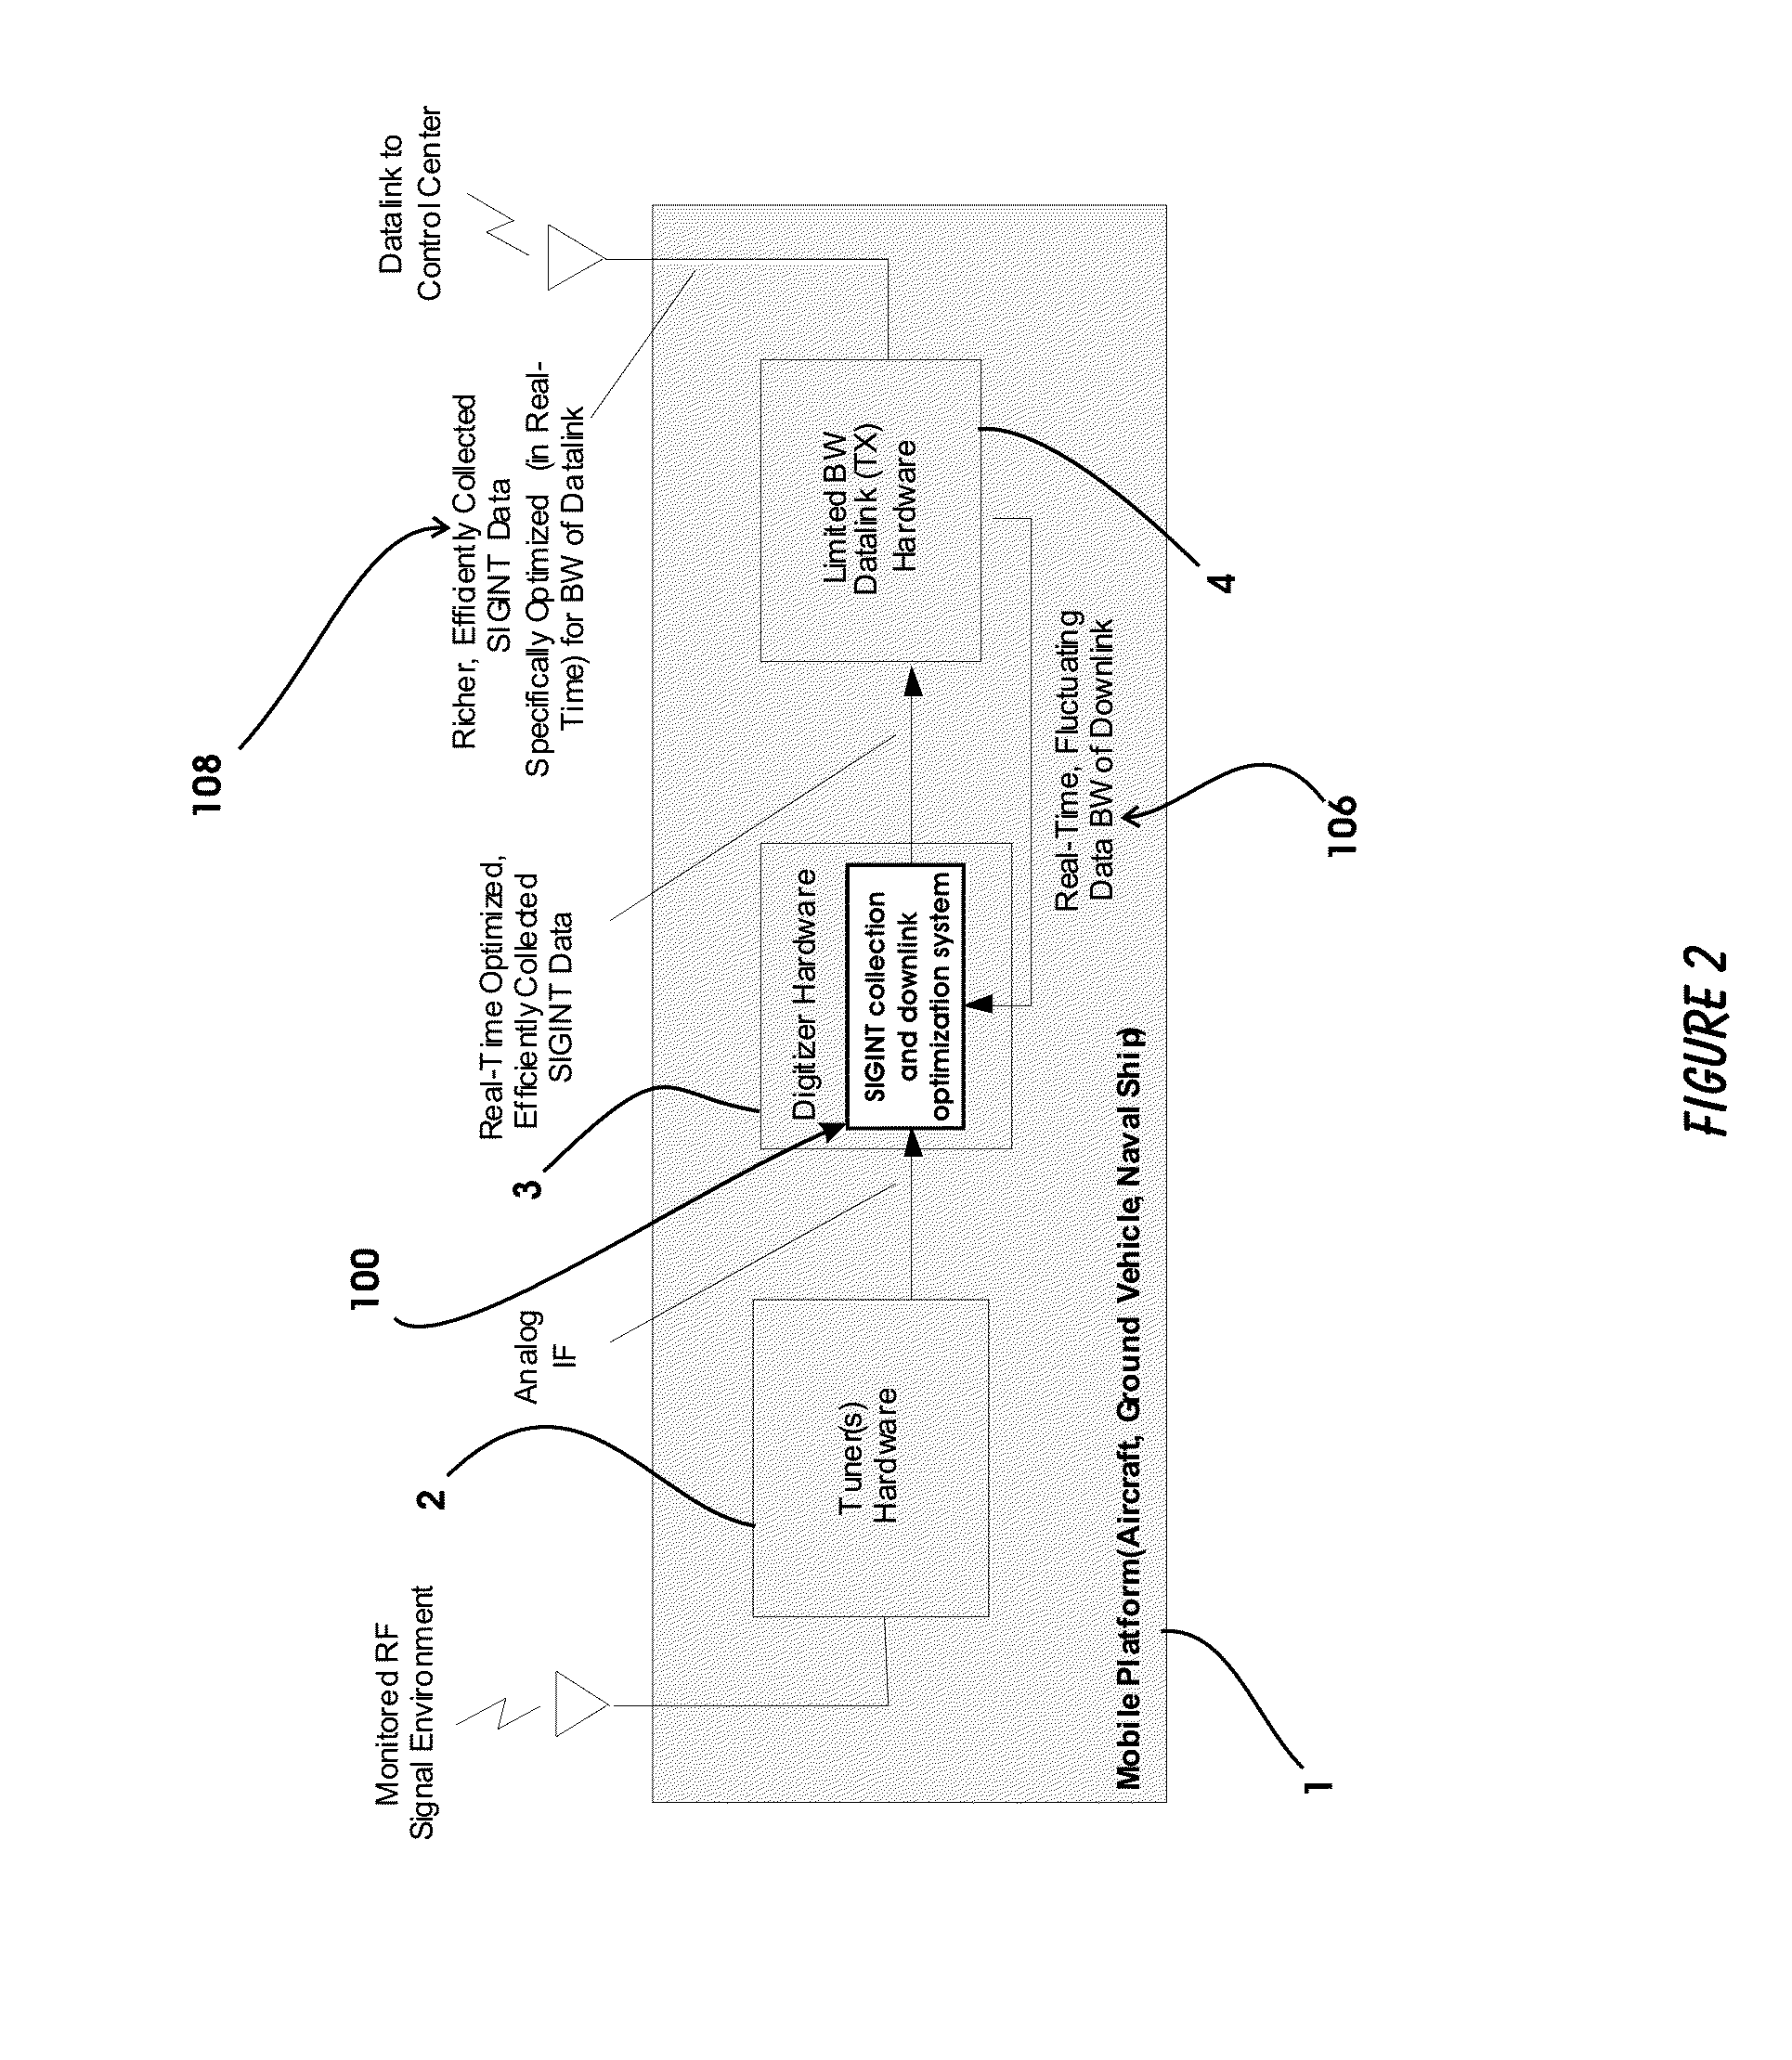 Method and System For Optimizing The Efficiency of SIGINT Collection Systems on Mobile Platforms with Limited Bandwidth Connections